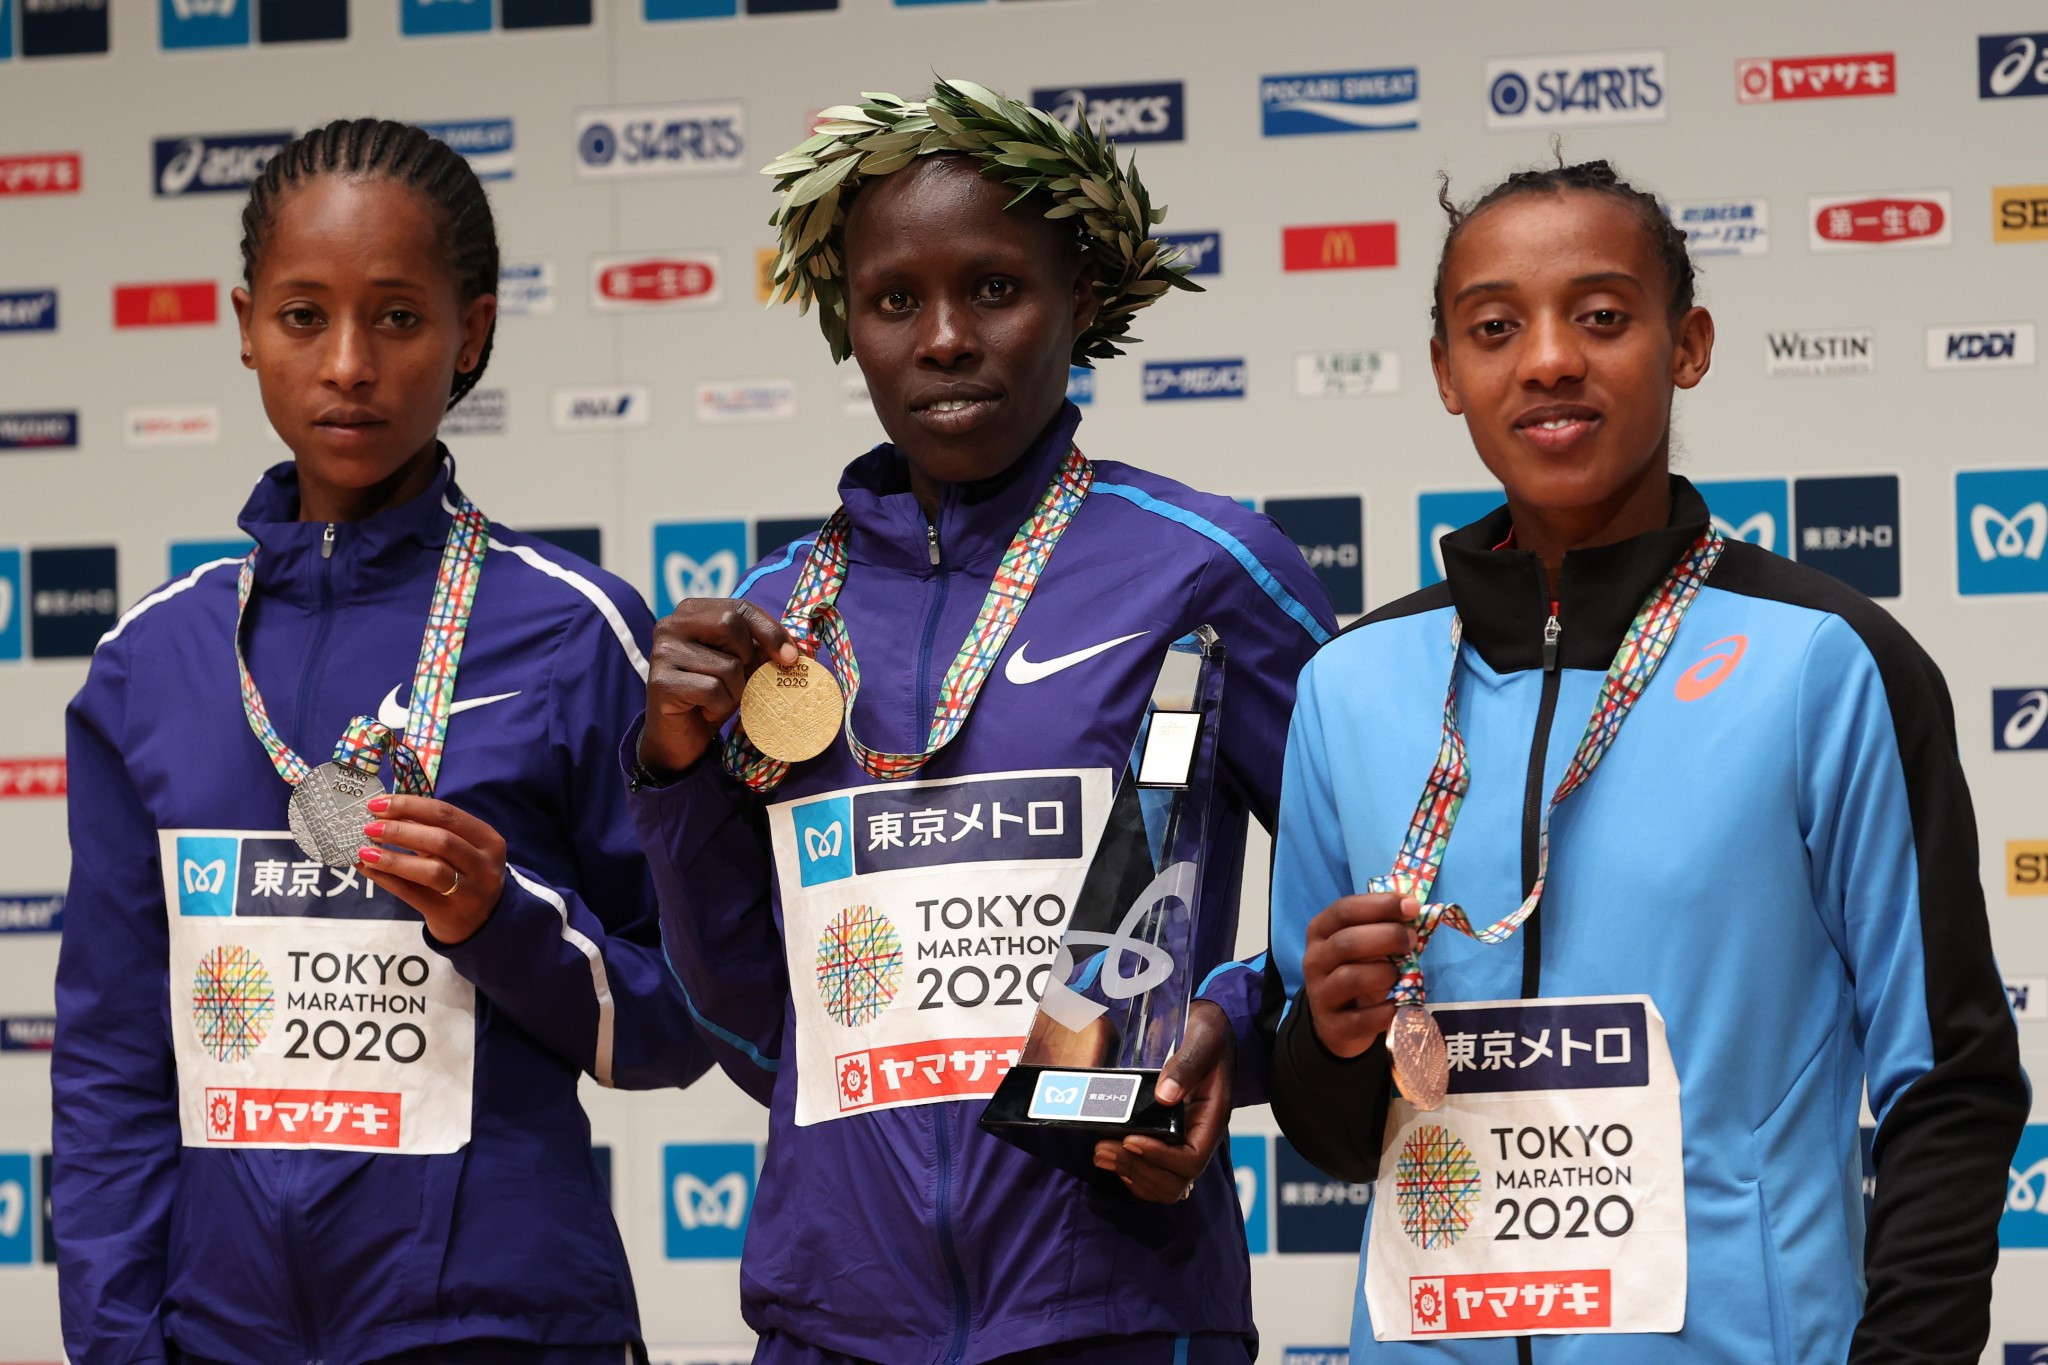 The podium for the women's race at the last edition of the Tokyo Marathon in March 2020 ©Getty Images